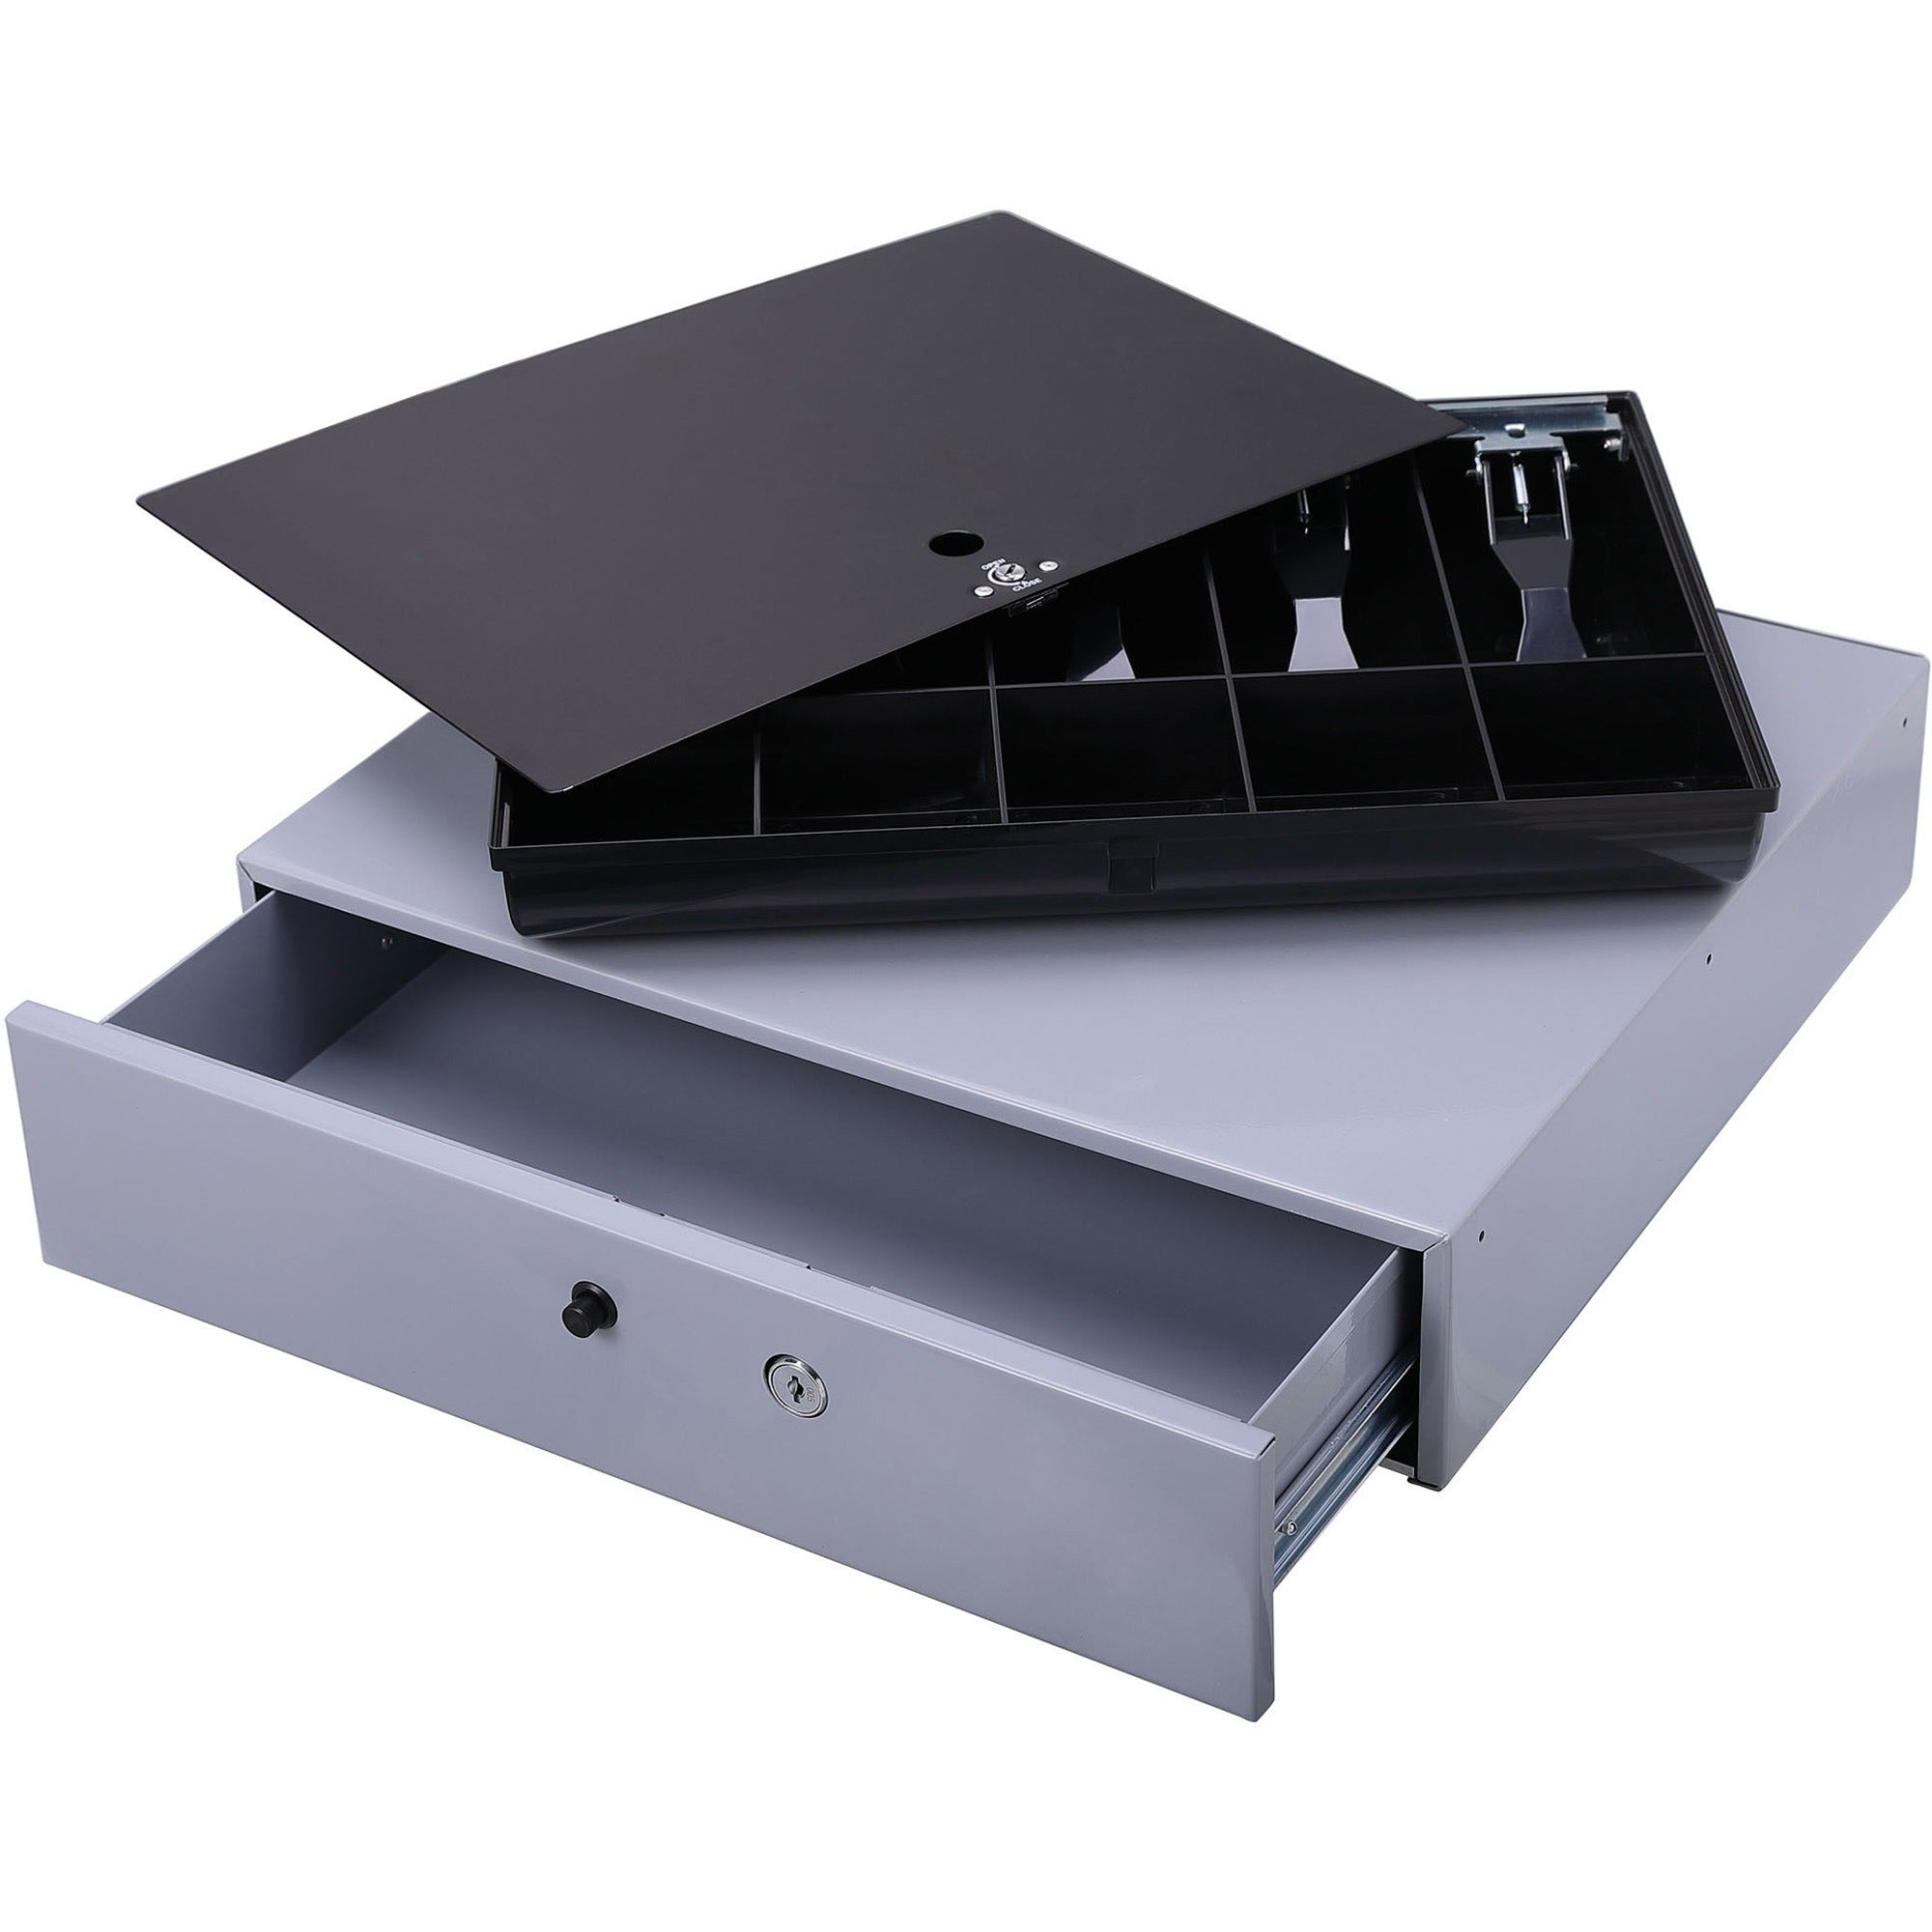 Sparco Removable Tray Cash Drawer - Gray - 3.8" Height x 17.8" Width x 15.8" Depth - 